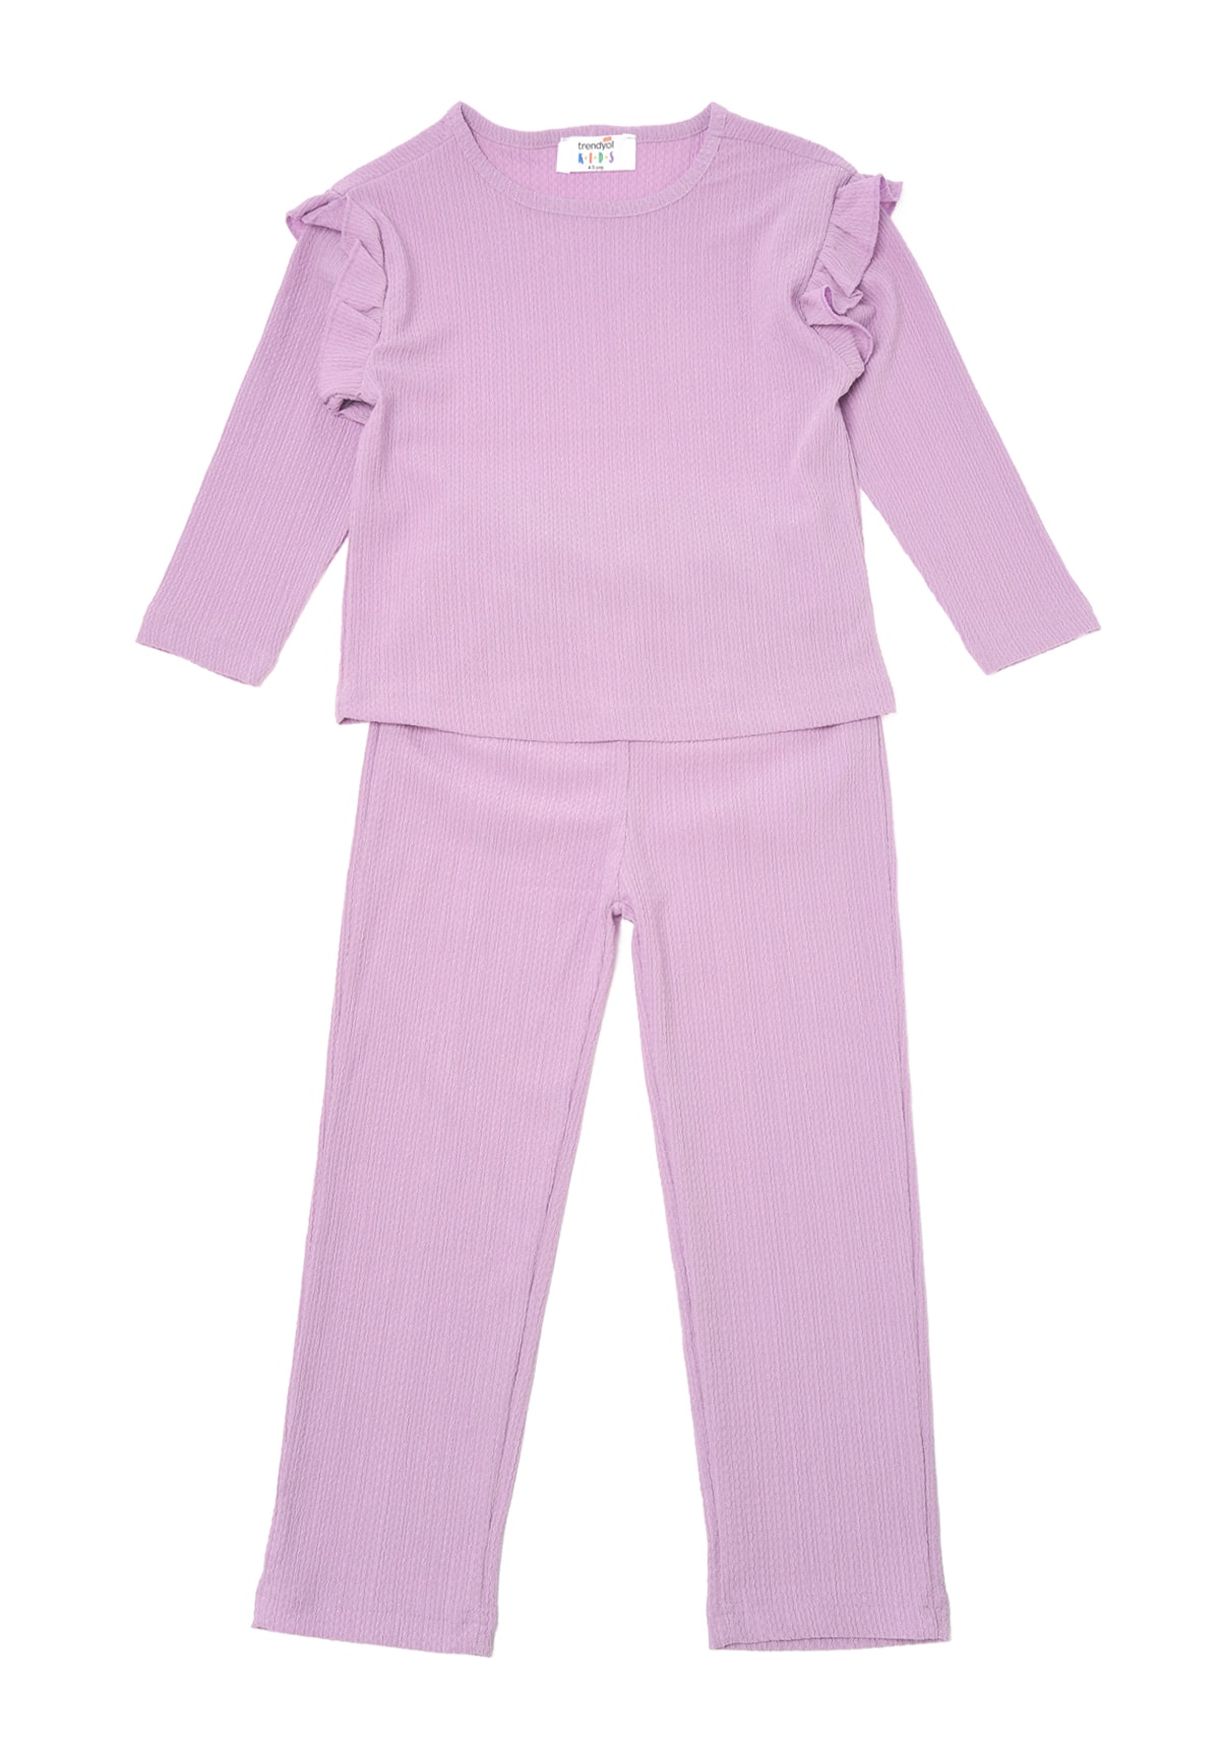 Kids Frill Detail Top & Trousers Set